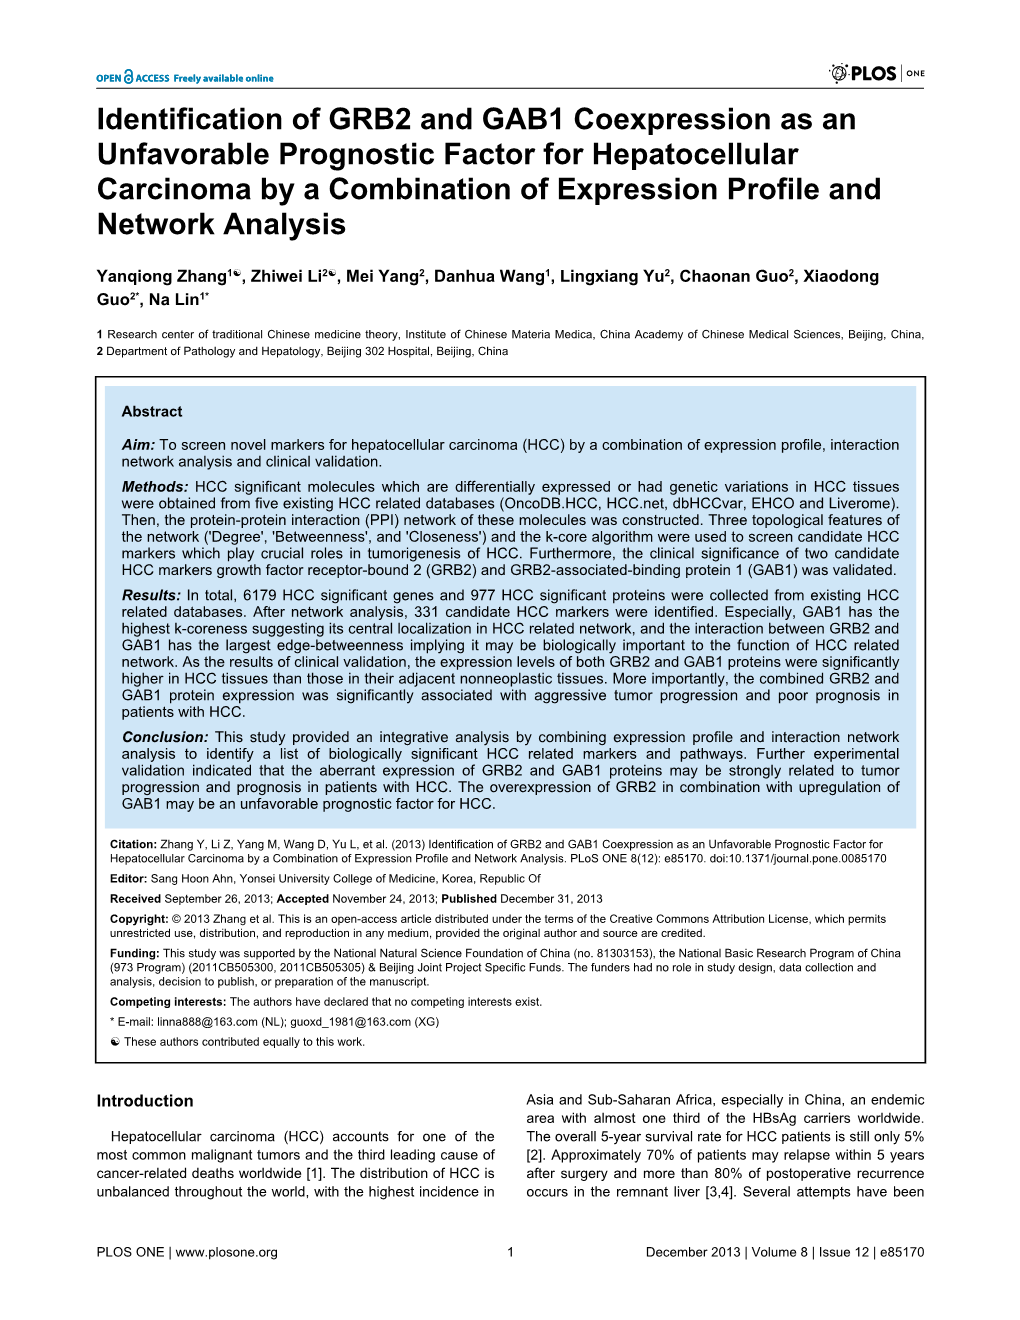 Identification of GRB2 and GAB1 Coexpression As an Unfavorable